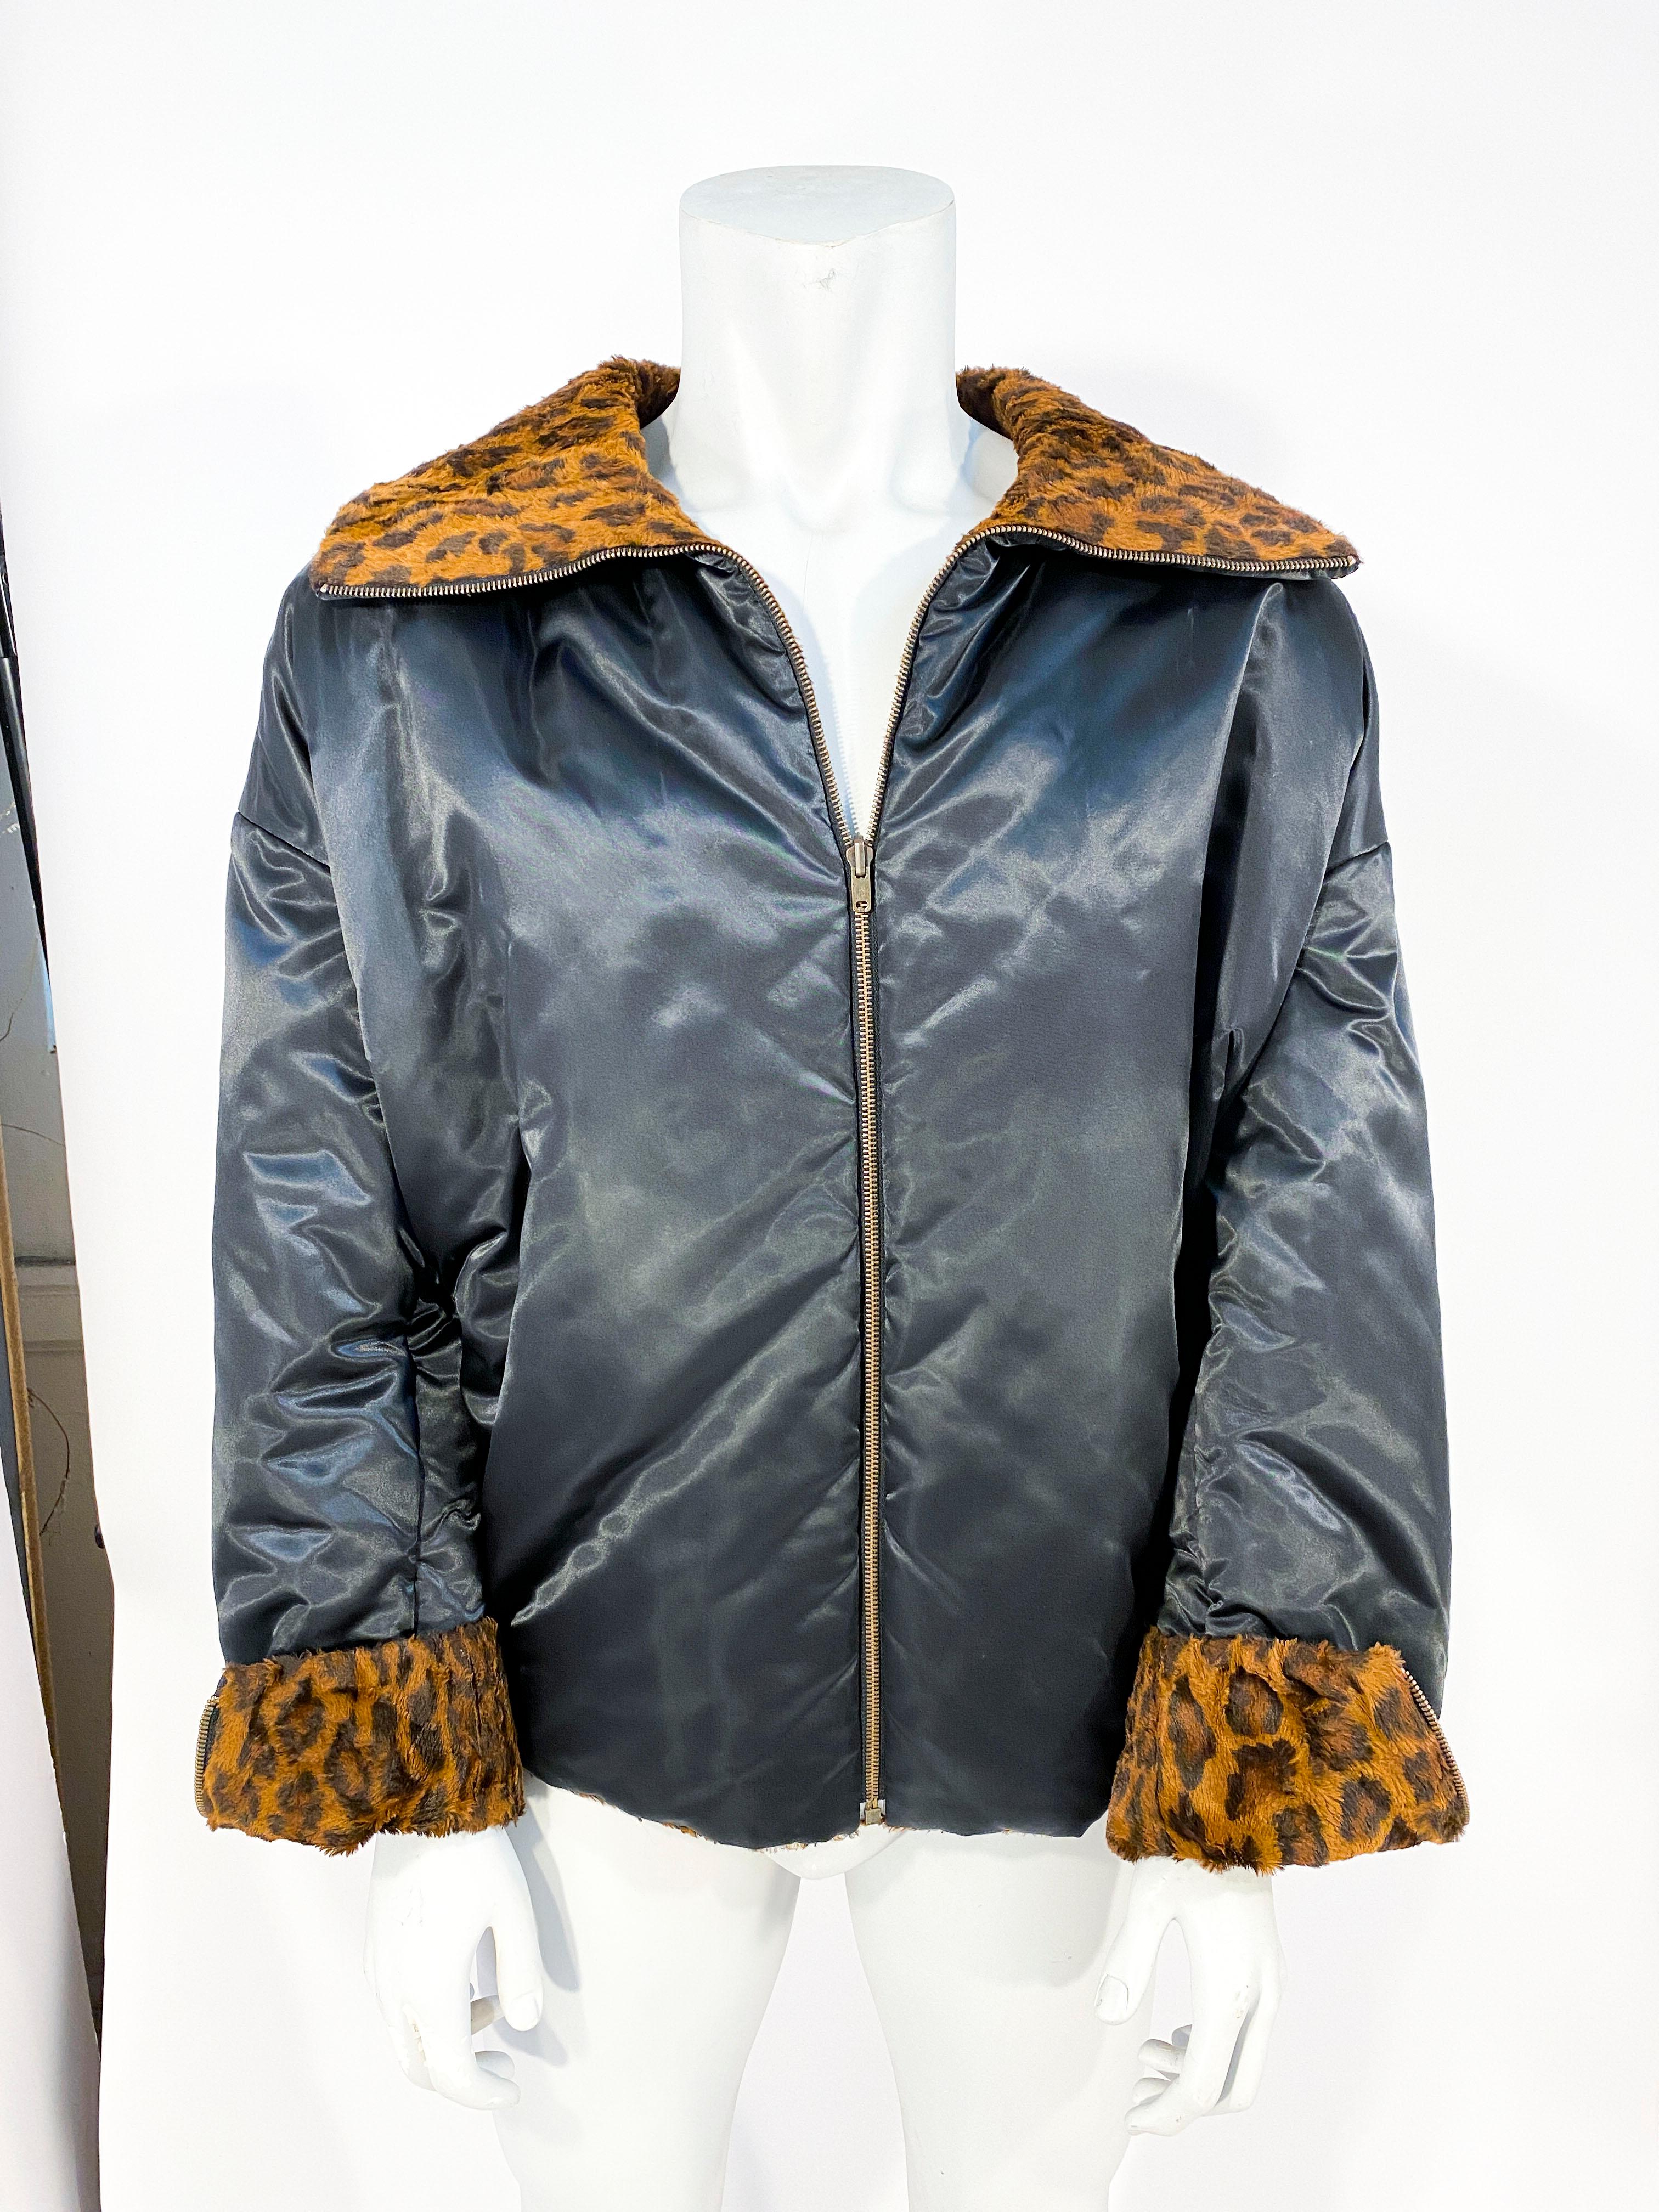 Dolce & Gabbana faux cheetah fur printed reversible jacket with a alternative black nylon face with letterman wording. The cuffs are zipped to accent the chosen side and the color is wide.